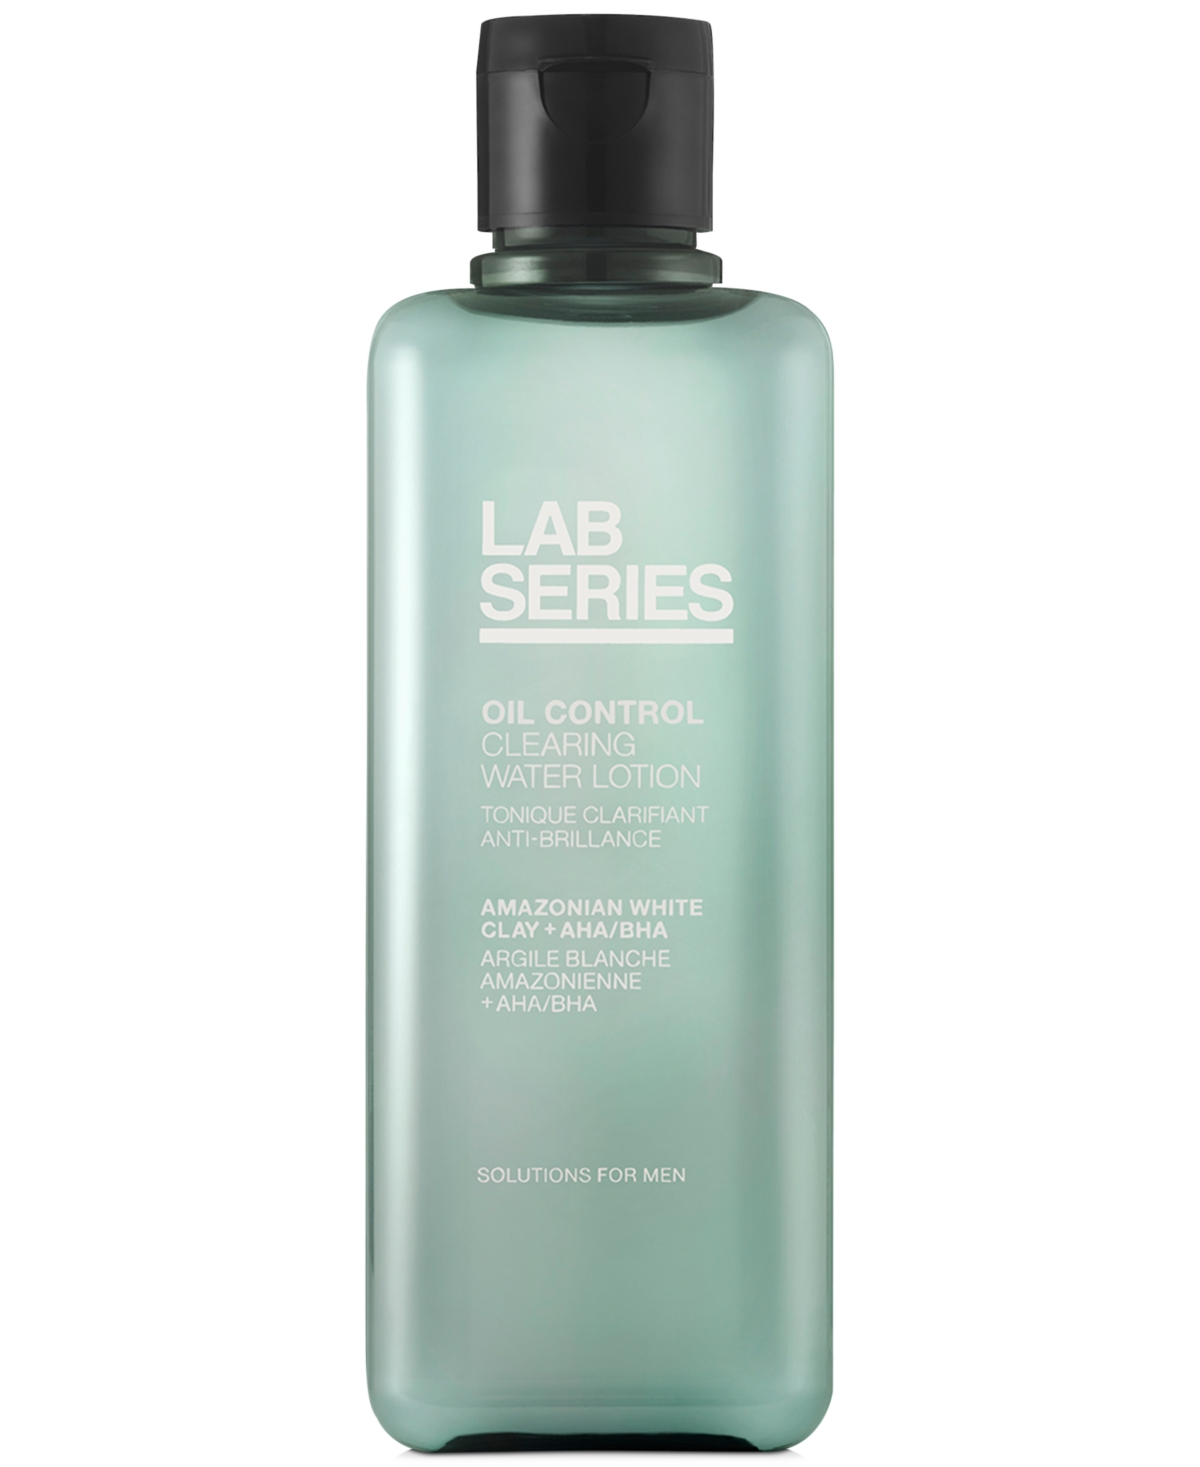 Lab Series Oil Control Clearing Water Lotion, 6.7-oz.